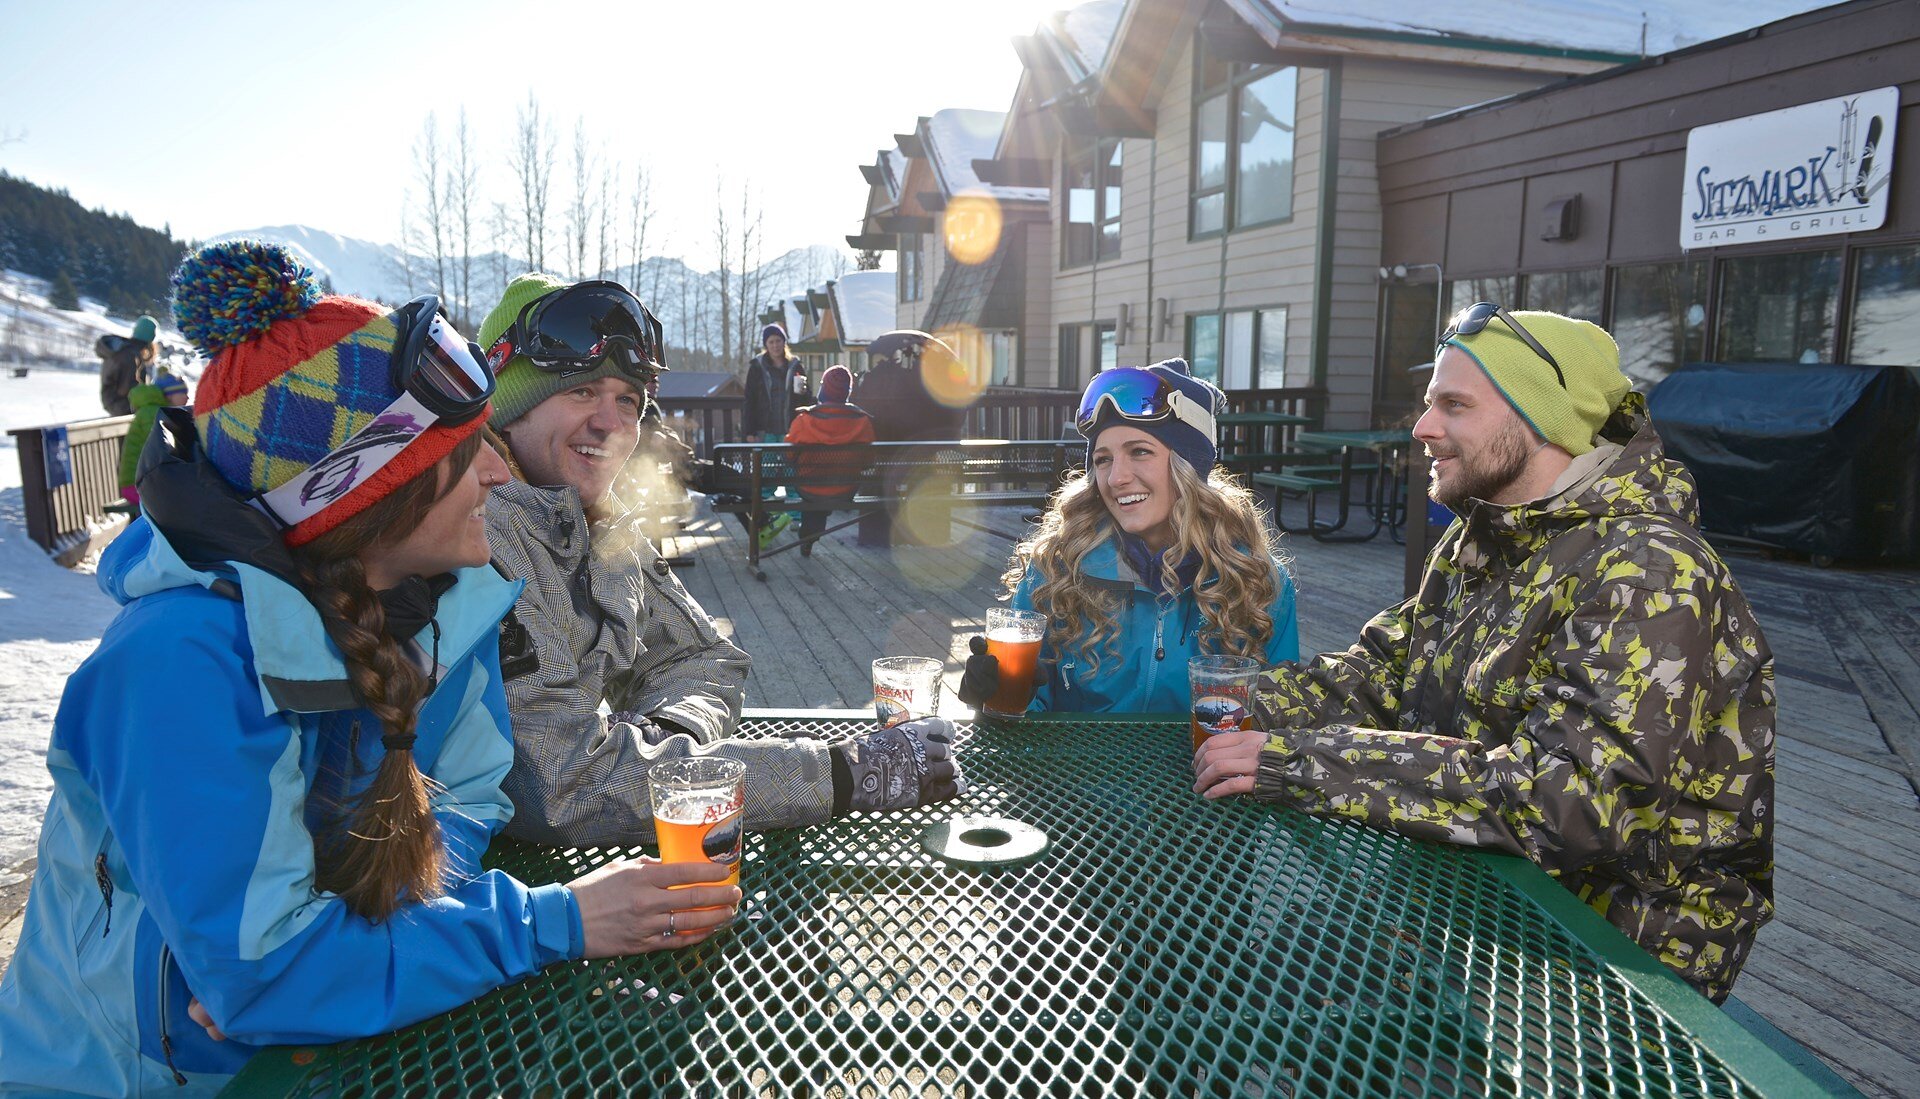  Skiers enjoying a drink on the deck of the Sitz Mark  